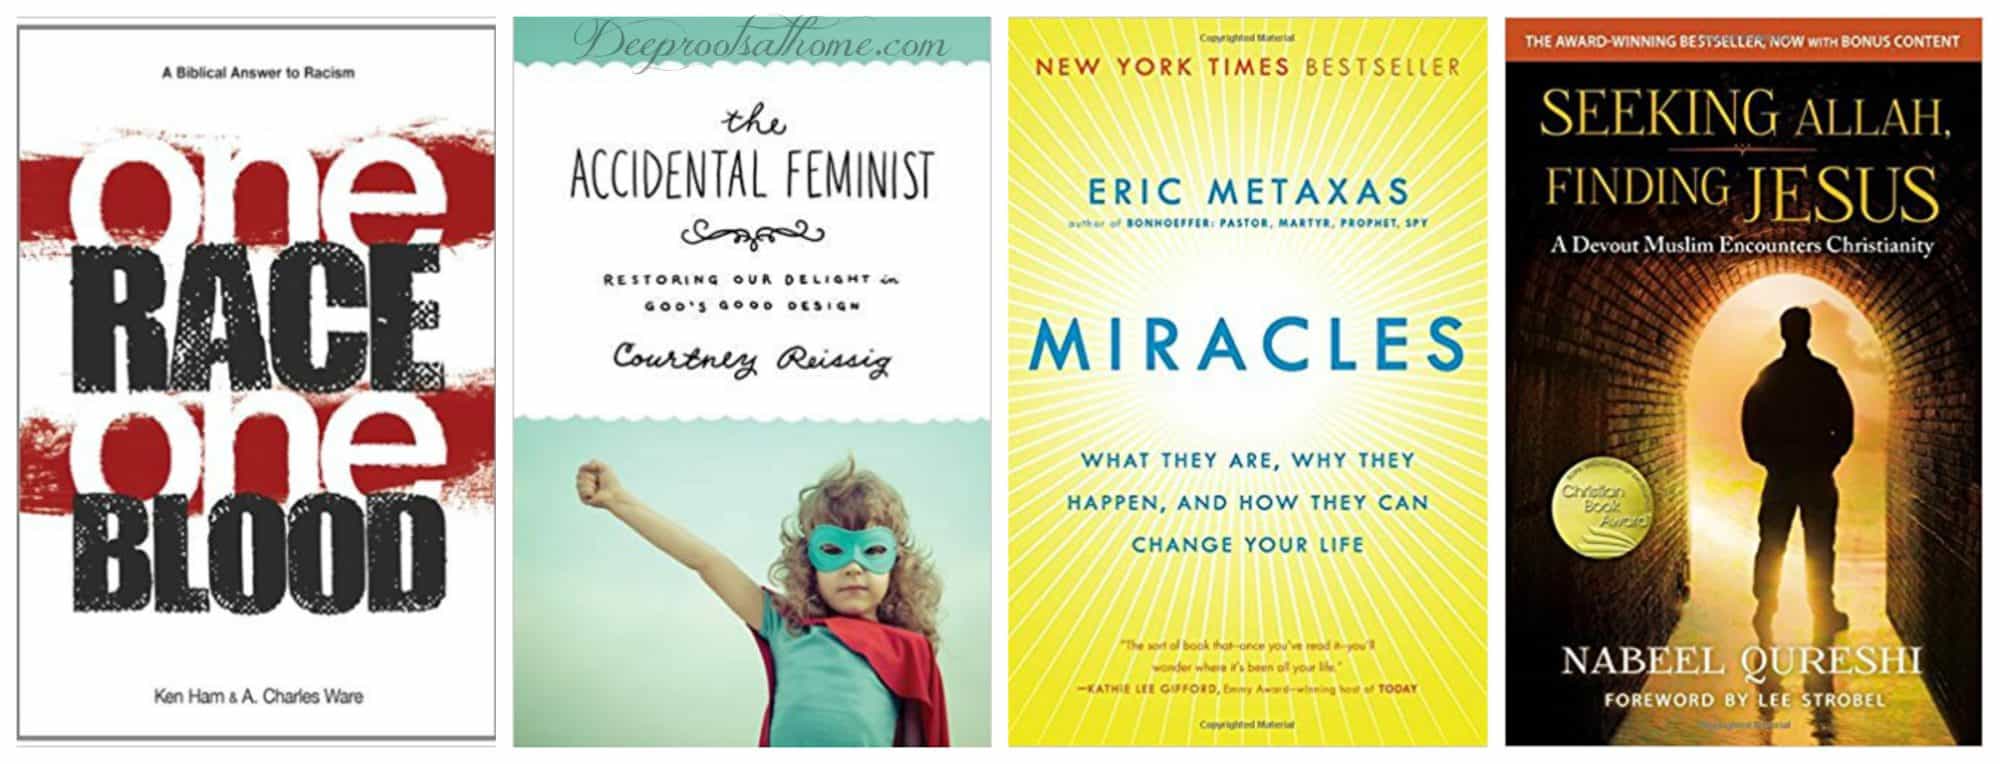  4 book covers: The Accidental Feminist by Courtney Reissig; Seeking Allah, Finding God by Nabeel Qureshi; Miracles by Eric Metaxas; One Race, One Blood by Dr, Charles Ware.